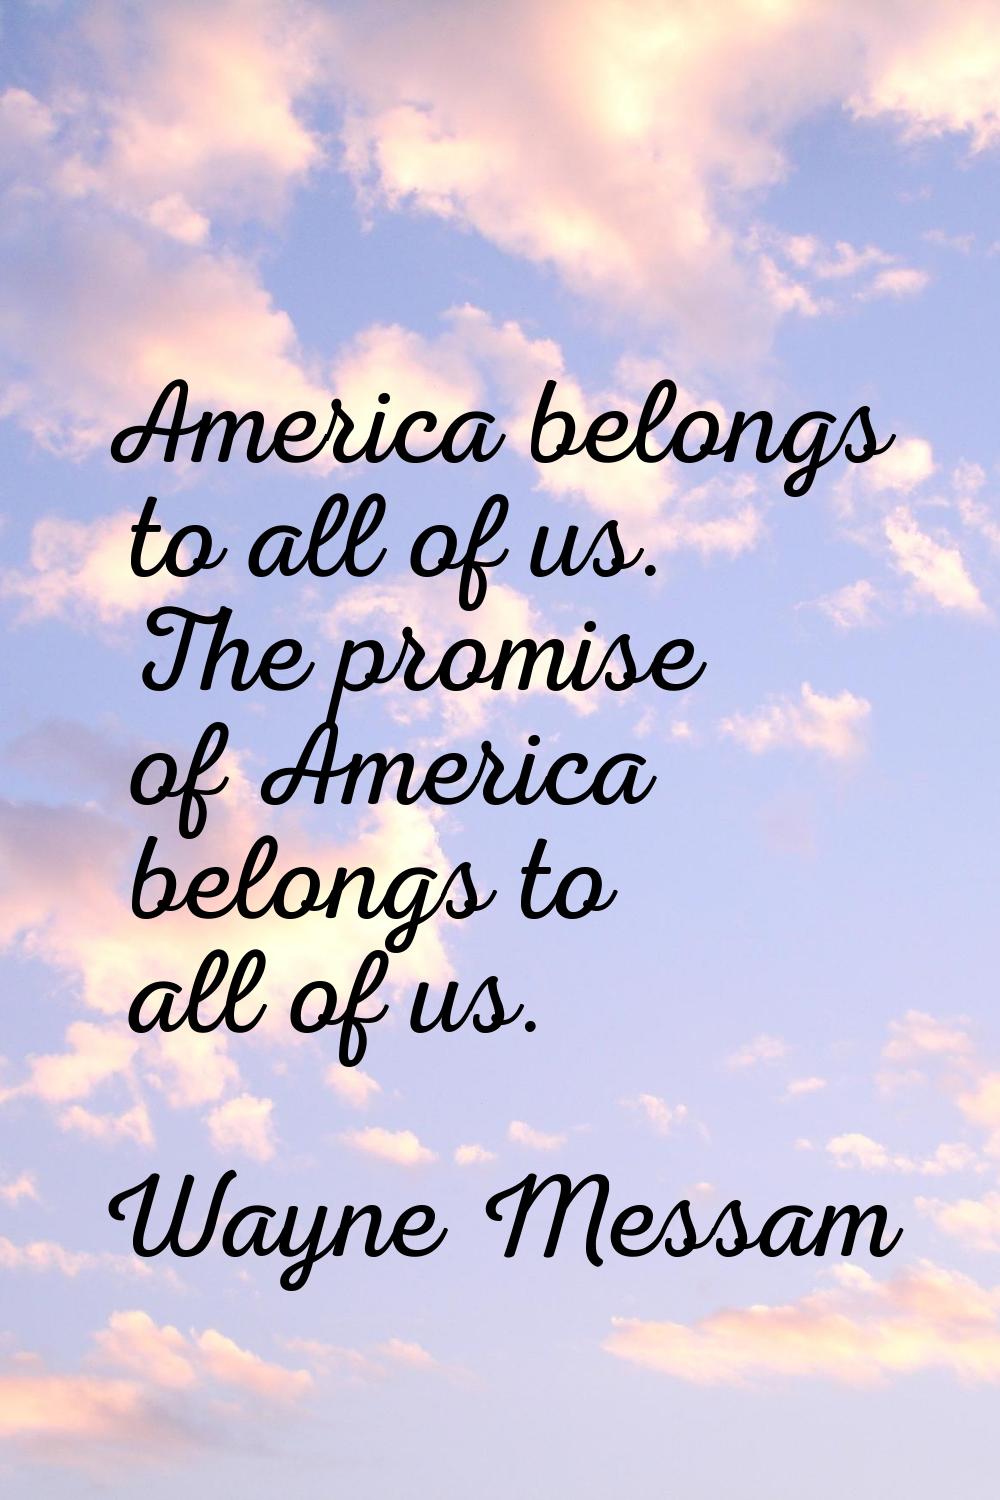 America belongs to all of us. The promise of America belongs to all of us.